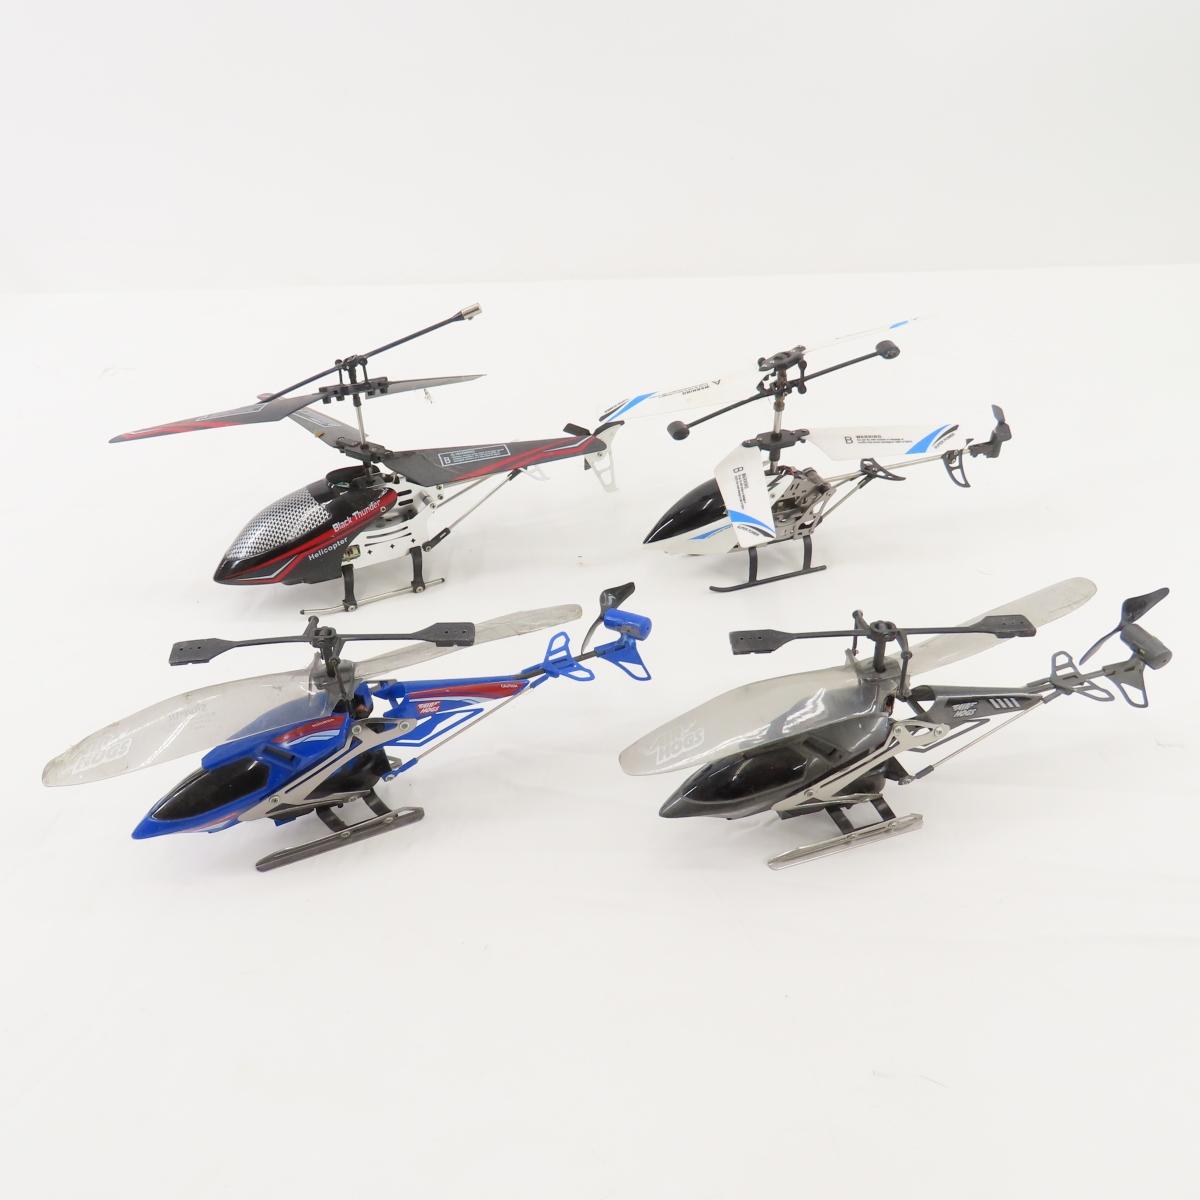 R/C Cars & Airplanes- Air Hogs and Others